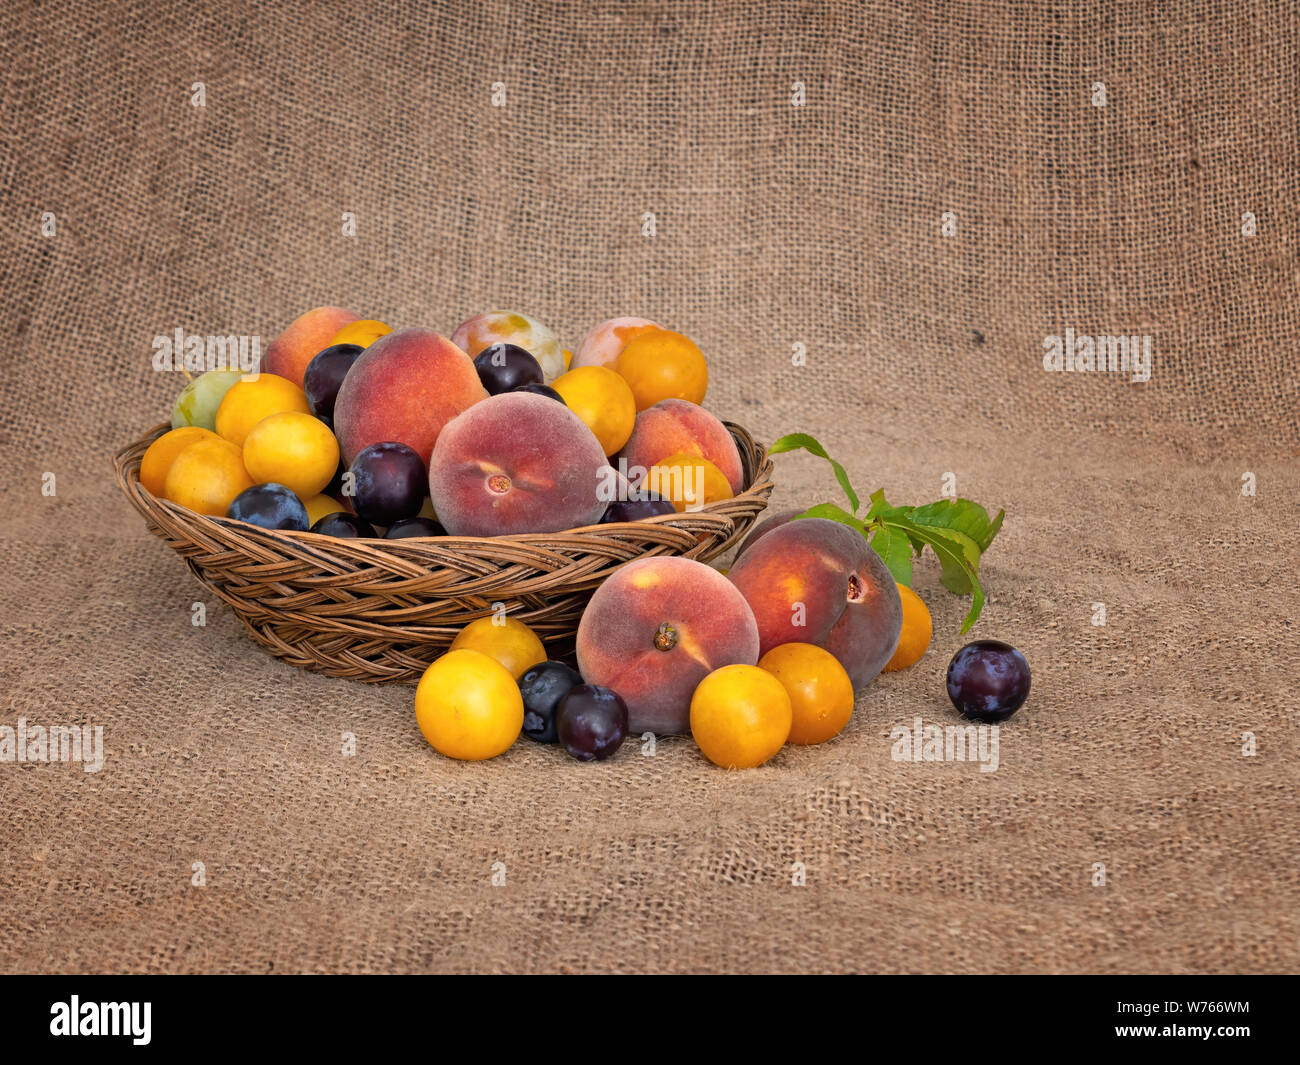 Old fashioned fruit from a long abandoned orchard. Tiny yellow plums, damsons, greengages and small, sweet peaches. Foraged natural fruit. On hessian. Stock Photo